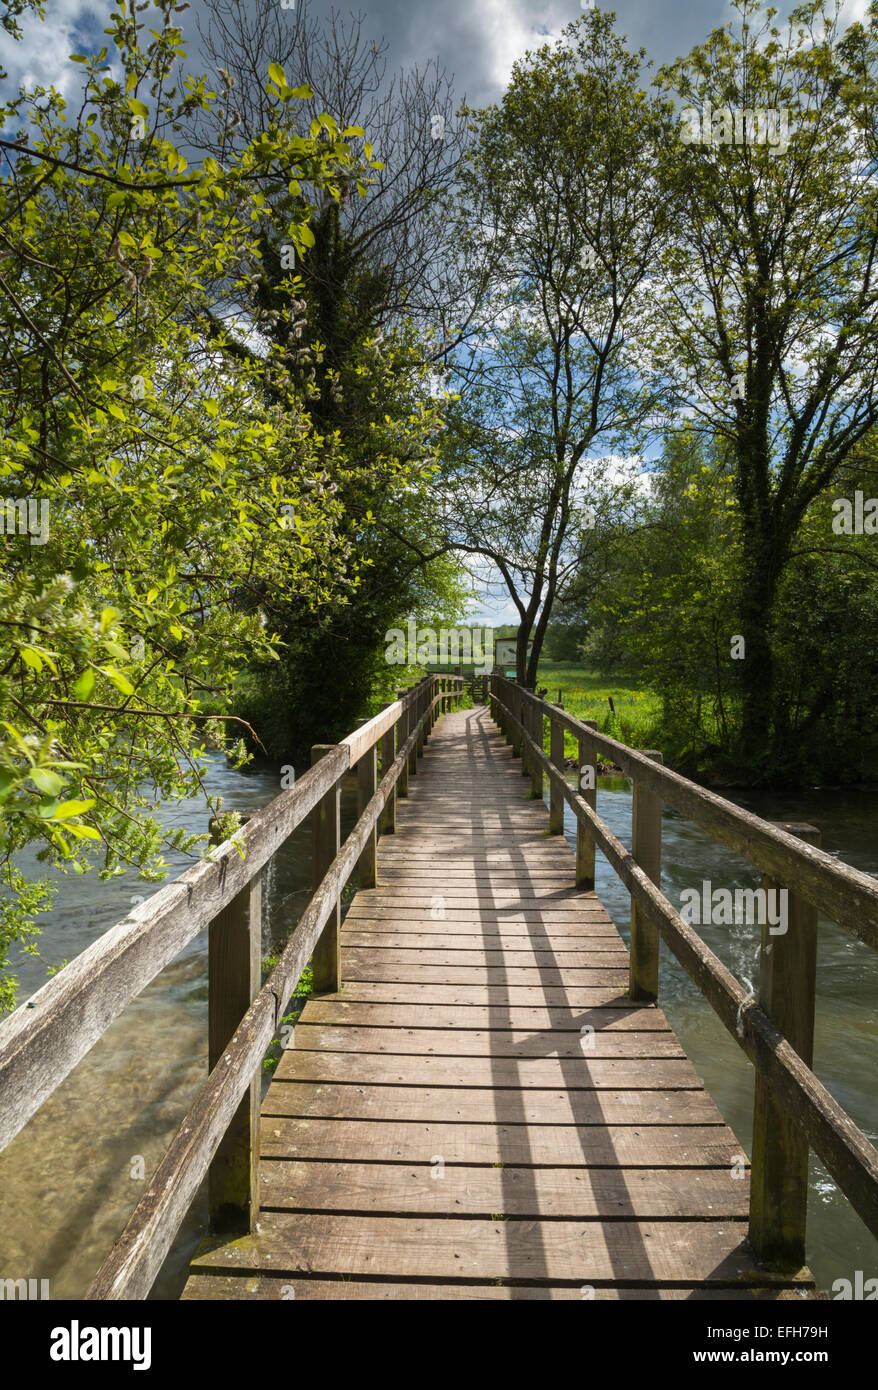 Wooden footbridge or walkway crosses a wide section of the River Test from Wherwell to Chilbolton Cow Common, Test Valley, Hampshire, England Stock Photo